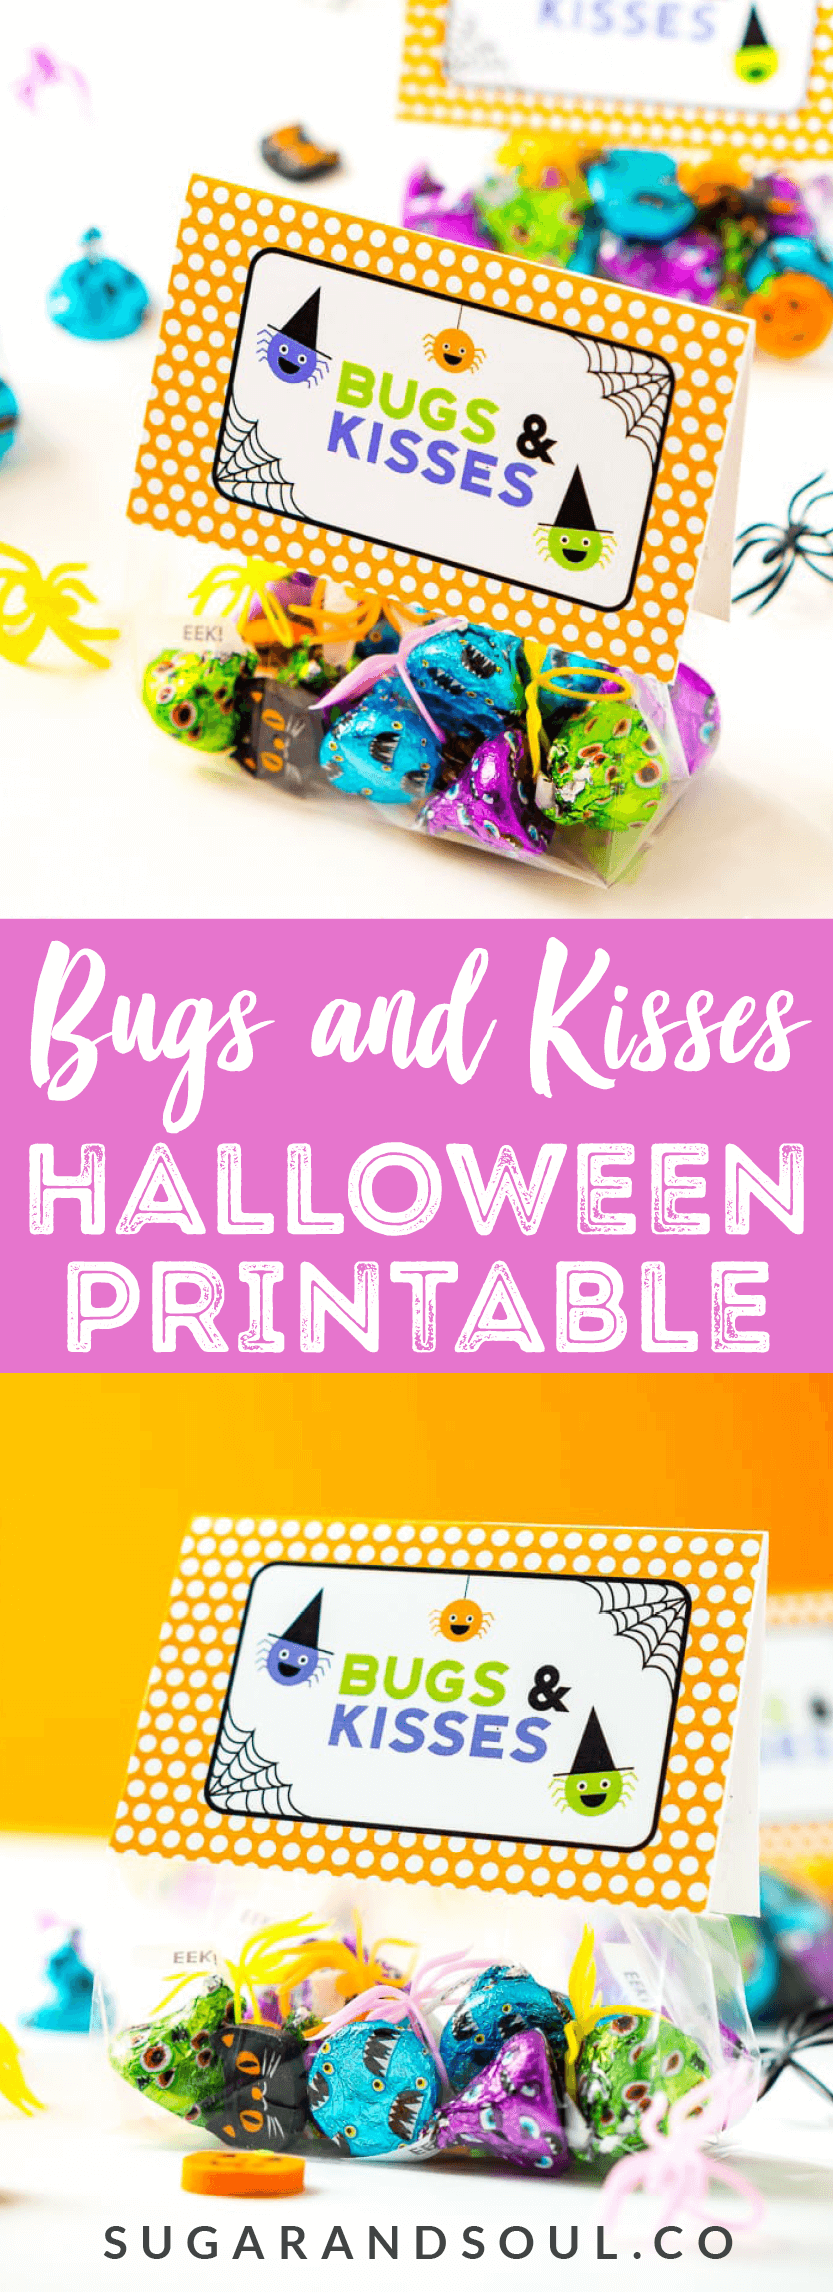 Planning a kid-friendly Halloween party or a family craft day? This adorable Bugs & Kisses Halloween Printable is perfect for preparing little bags of treats … and it’s free! via @sugarandsoulco